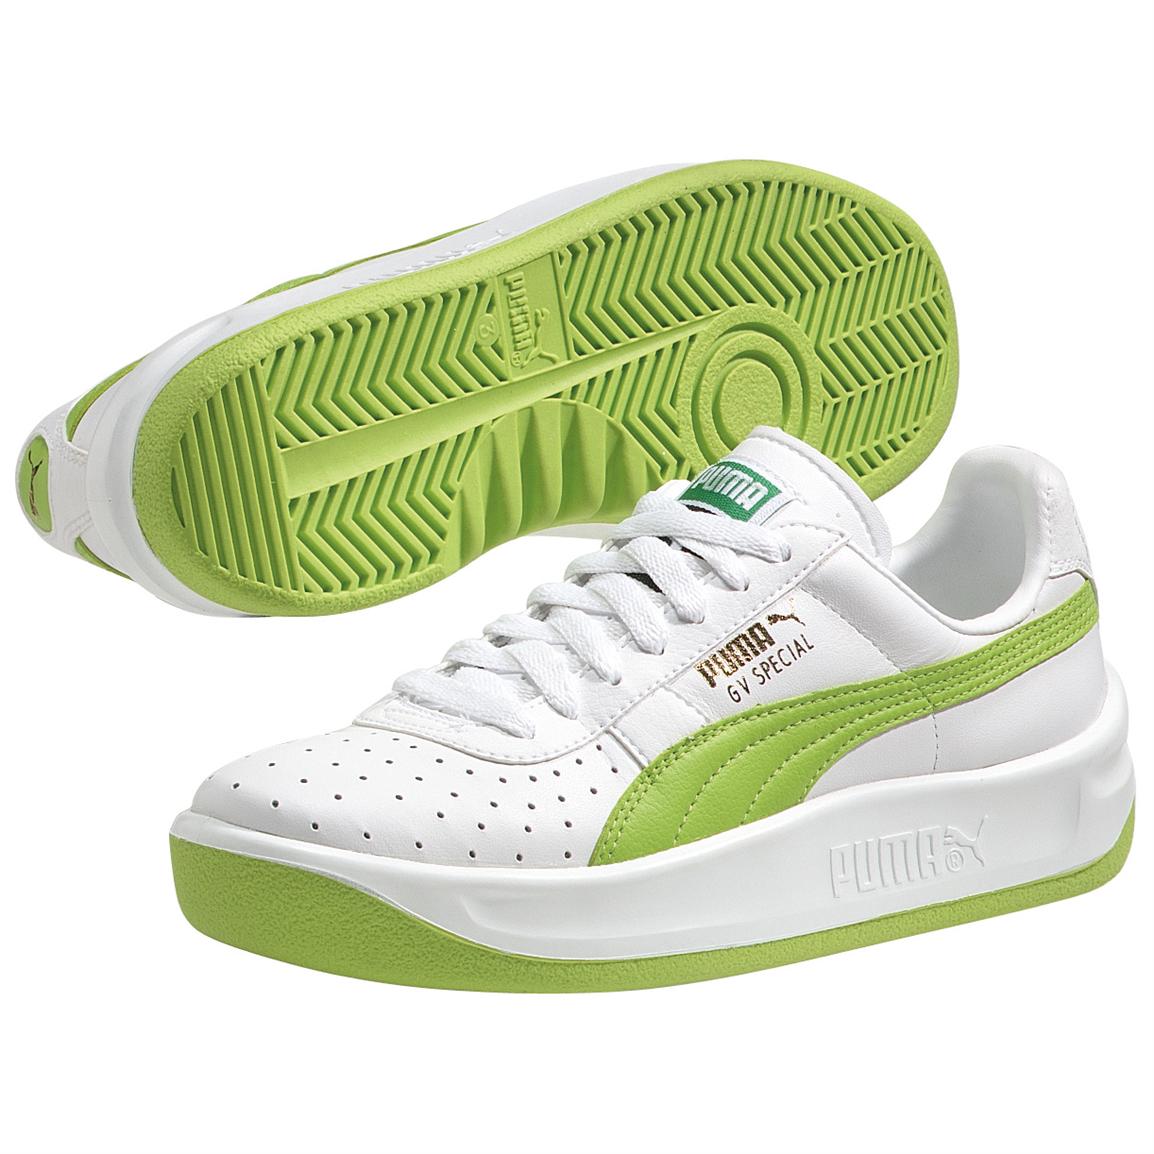 women's puma gv special sneakers - 57 